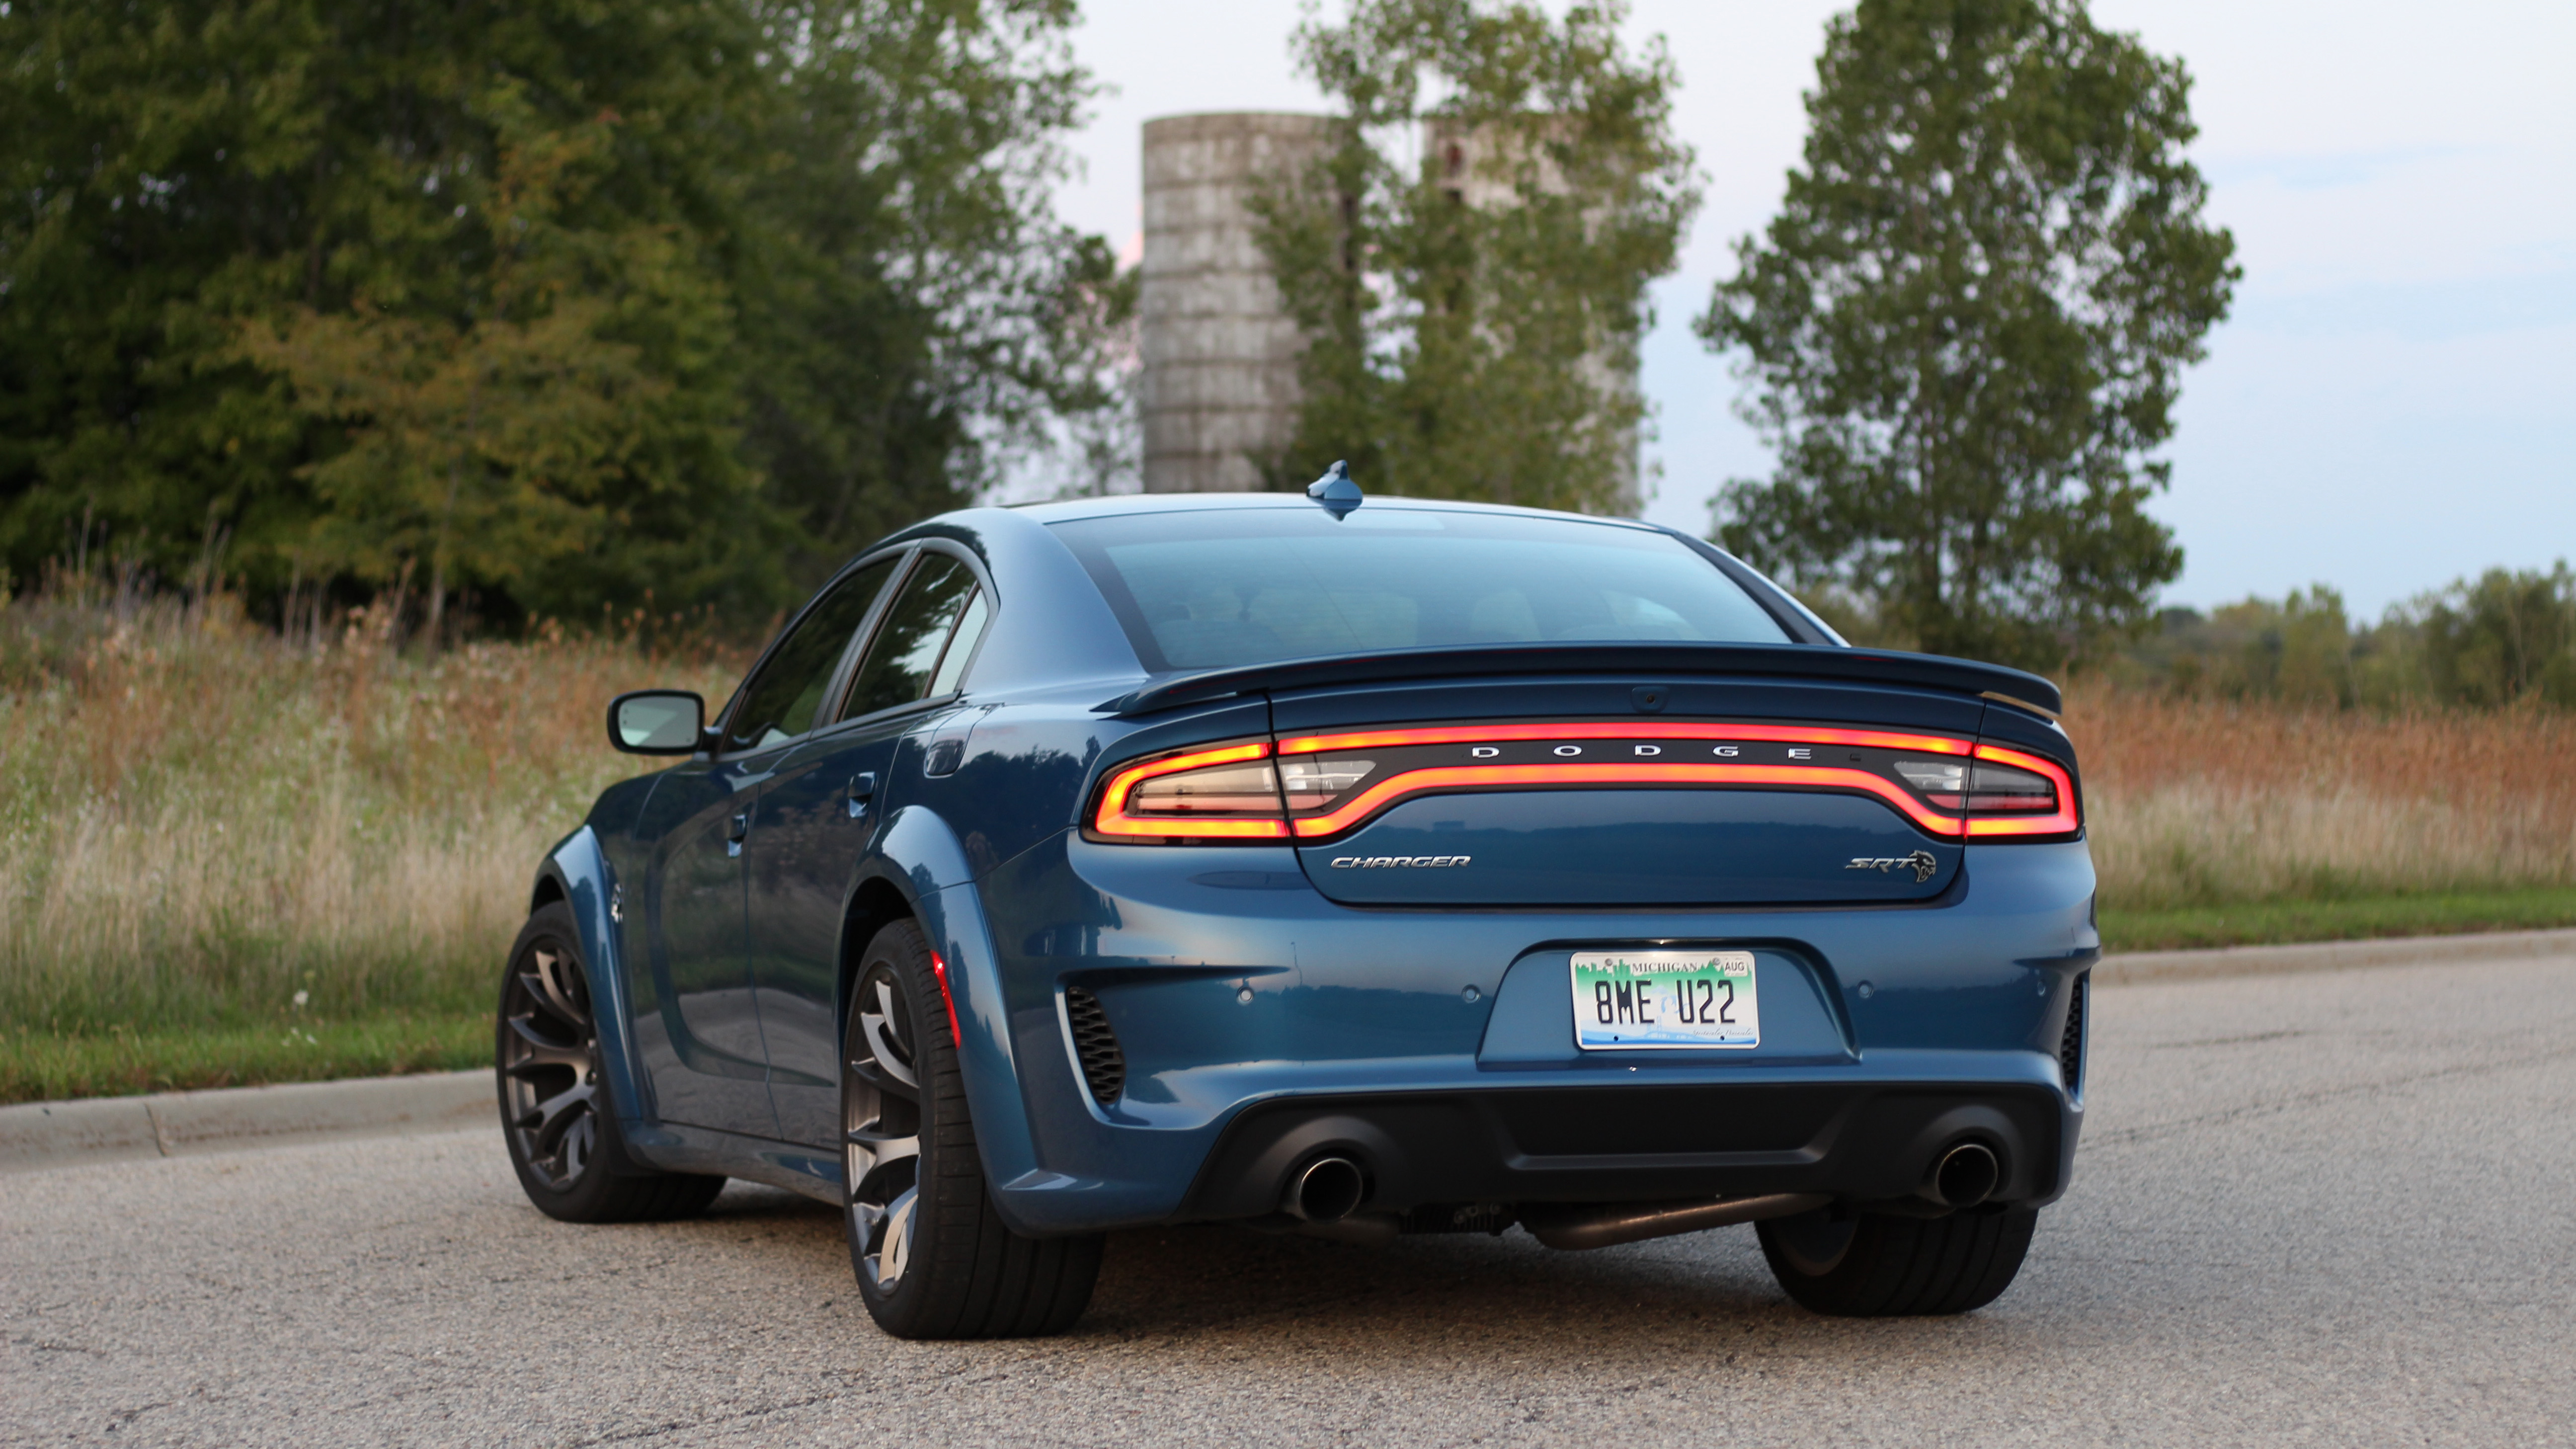 2021 Dodge Charger Reviews | Price, specs, features and ...